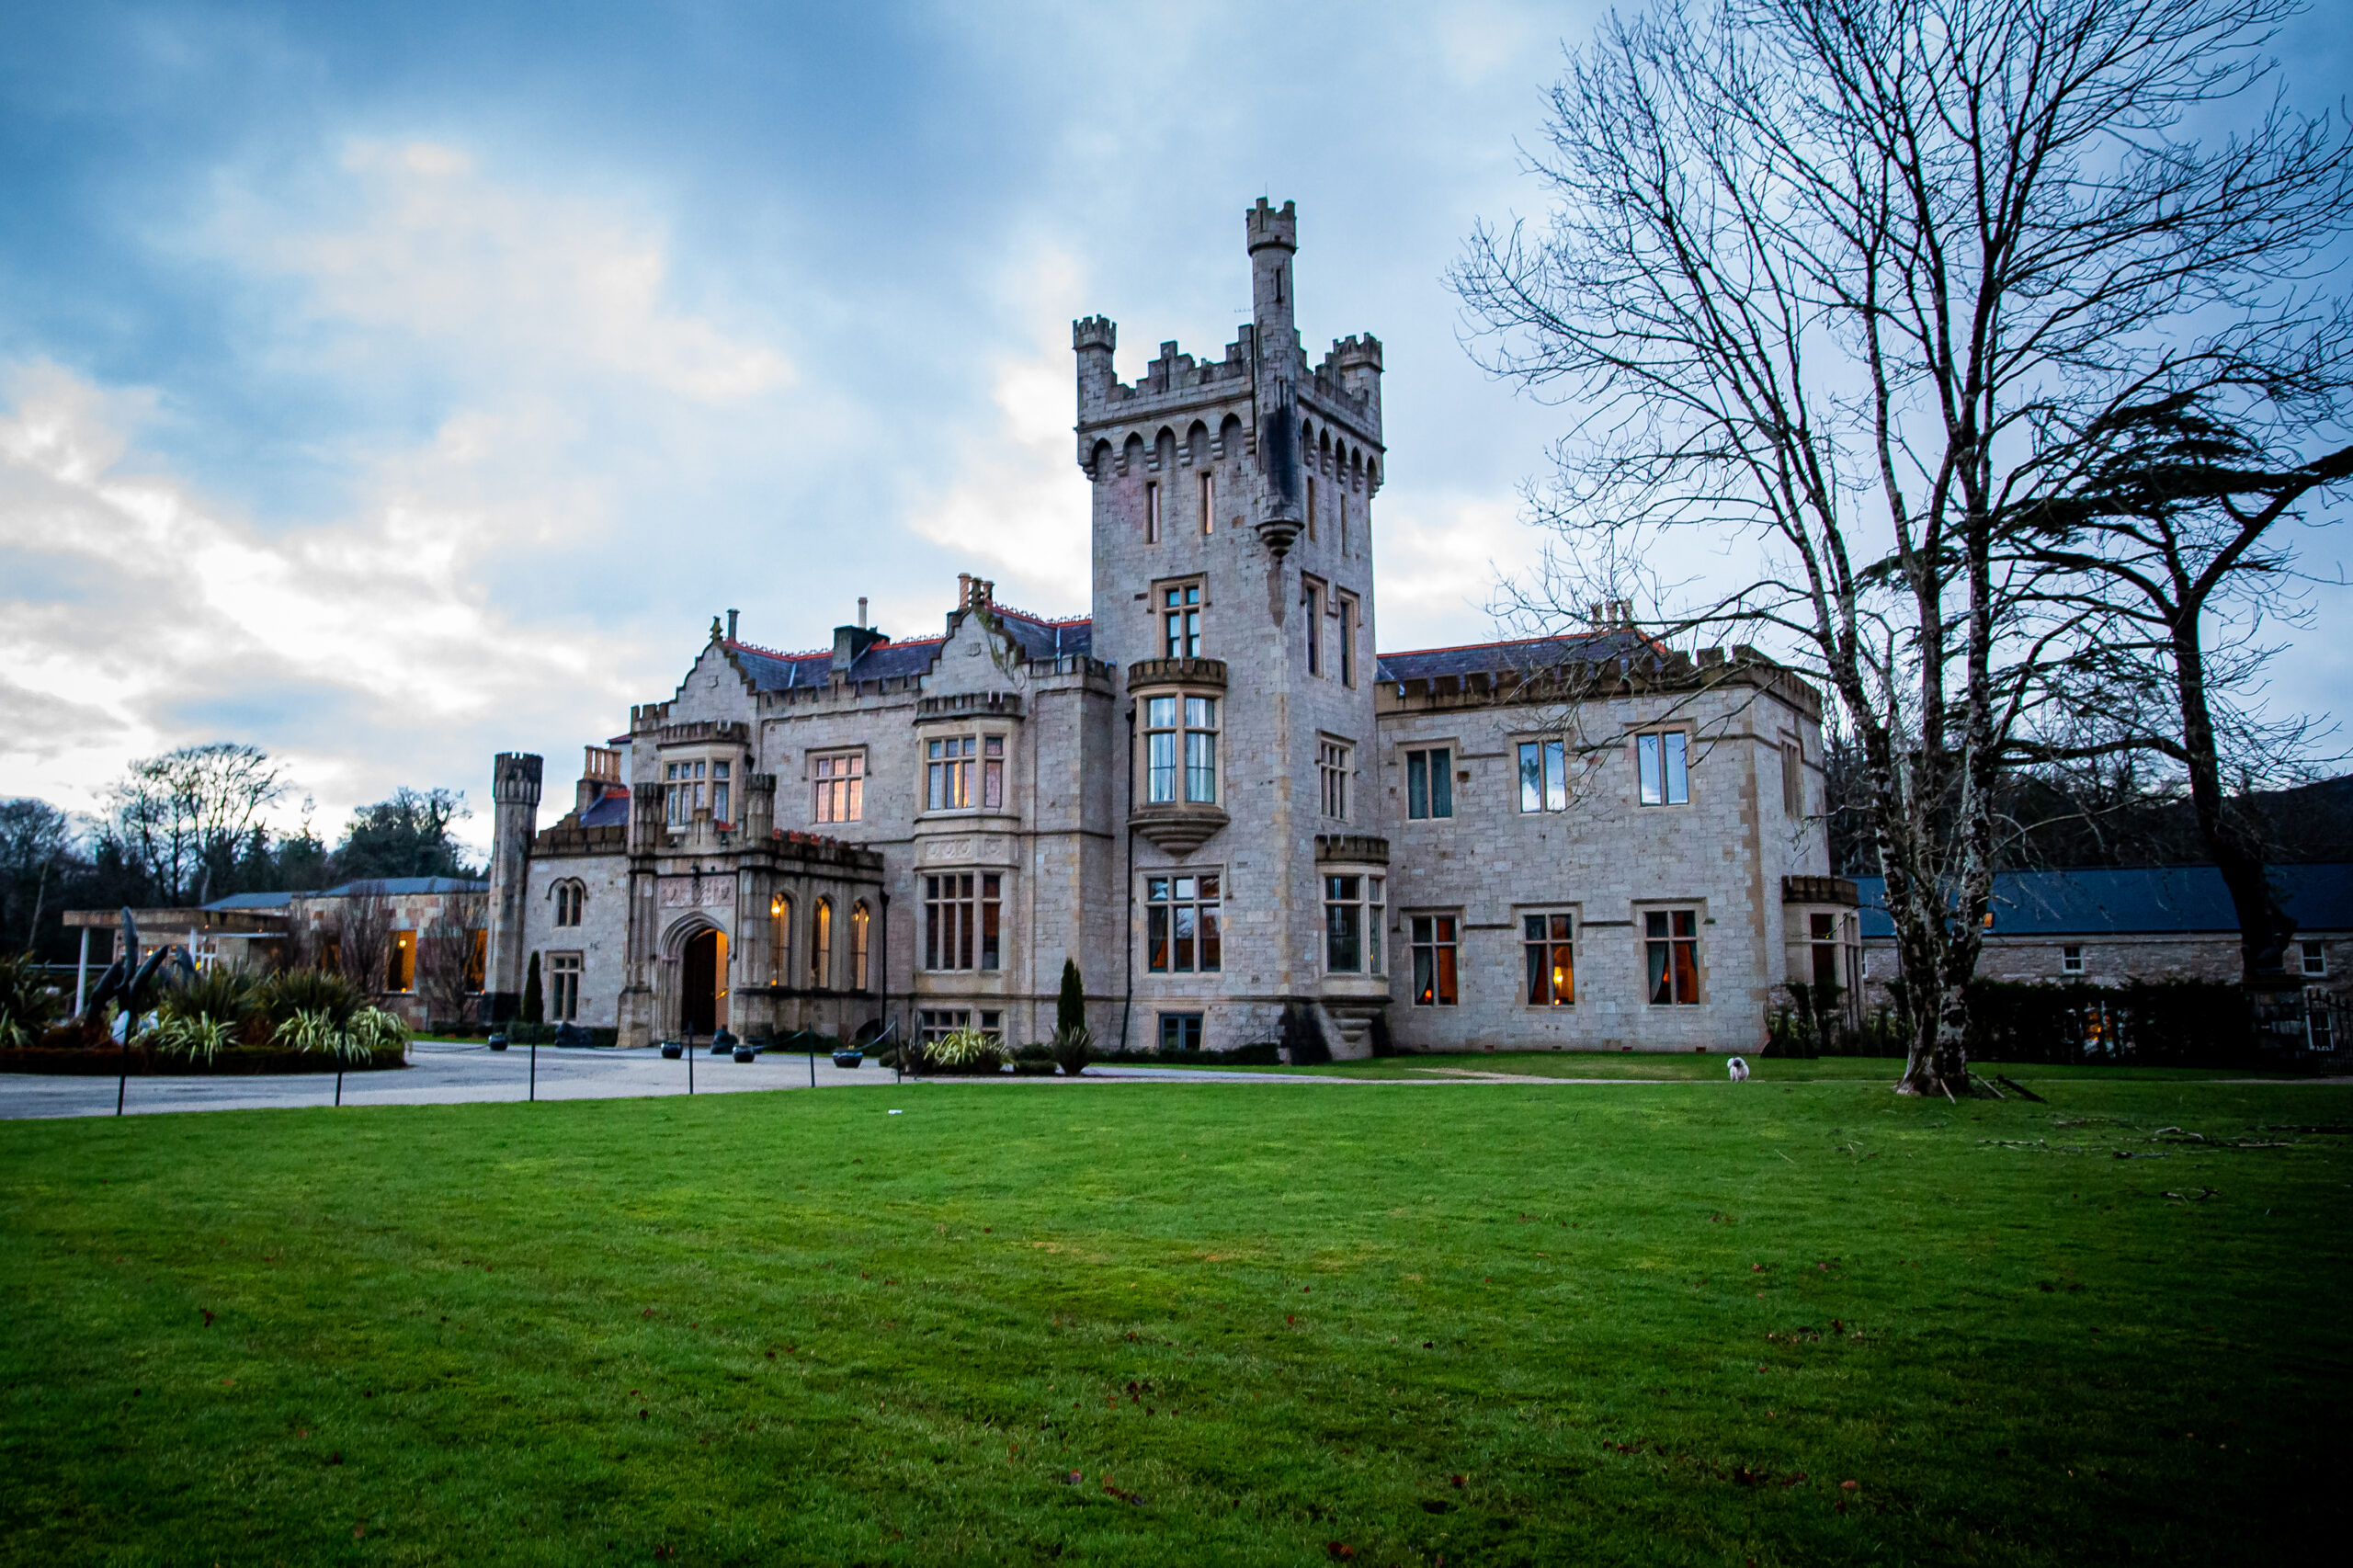 The grey stonework and epic turrets of Lough Eske Castle. This view shows that the castle has lots of beautiful bay windows. 